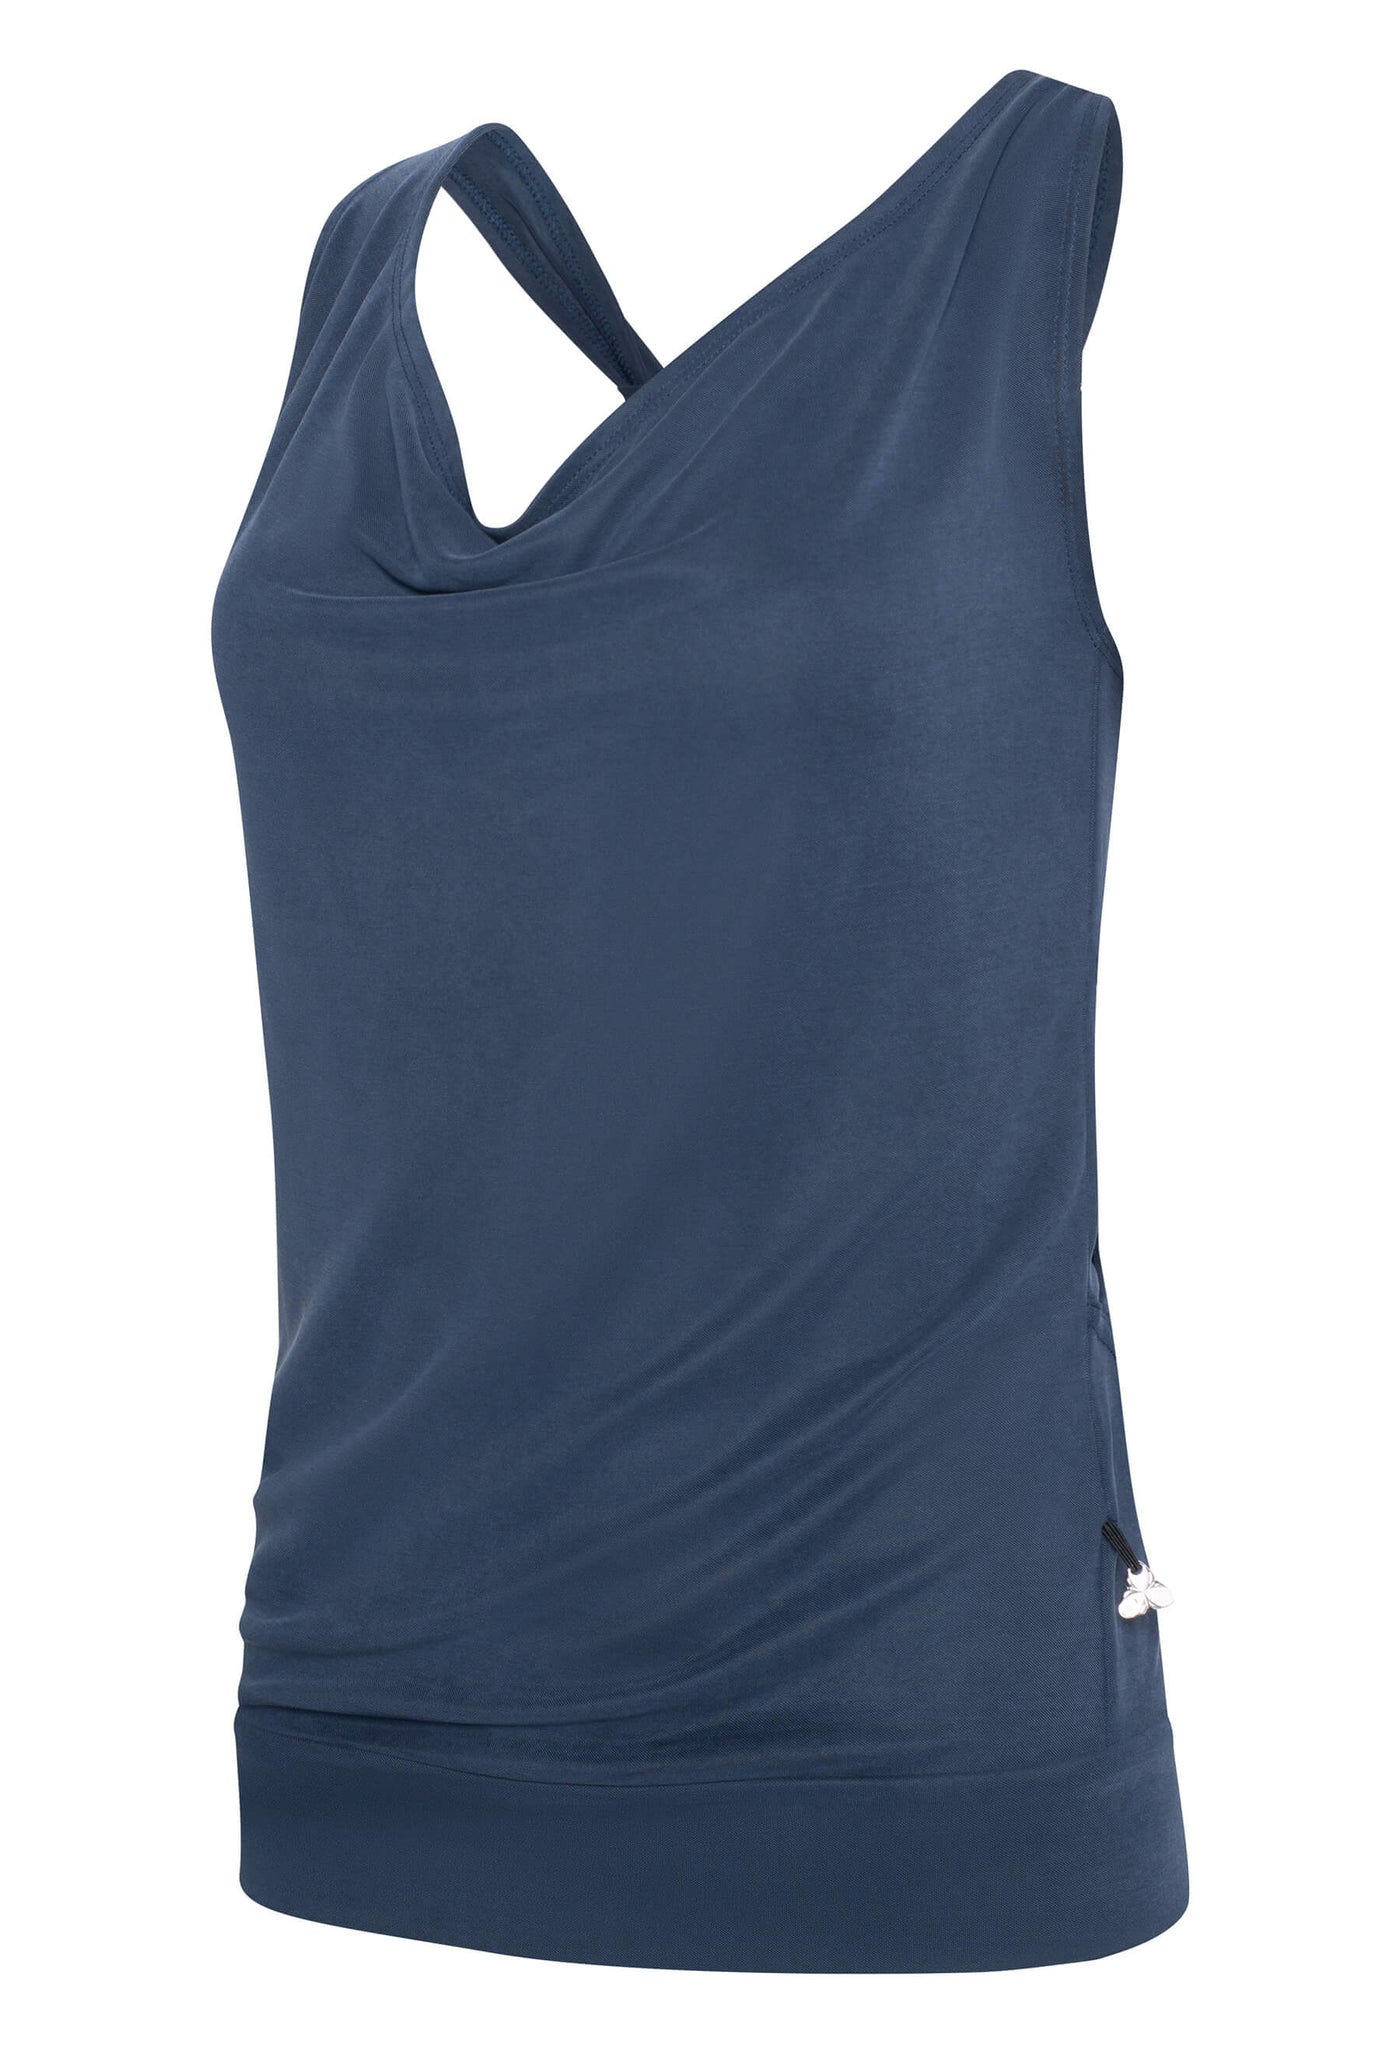 Flowy Tank Top with Racer Back - Rani - Travel Collection